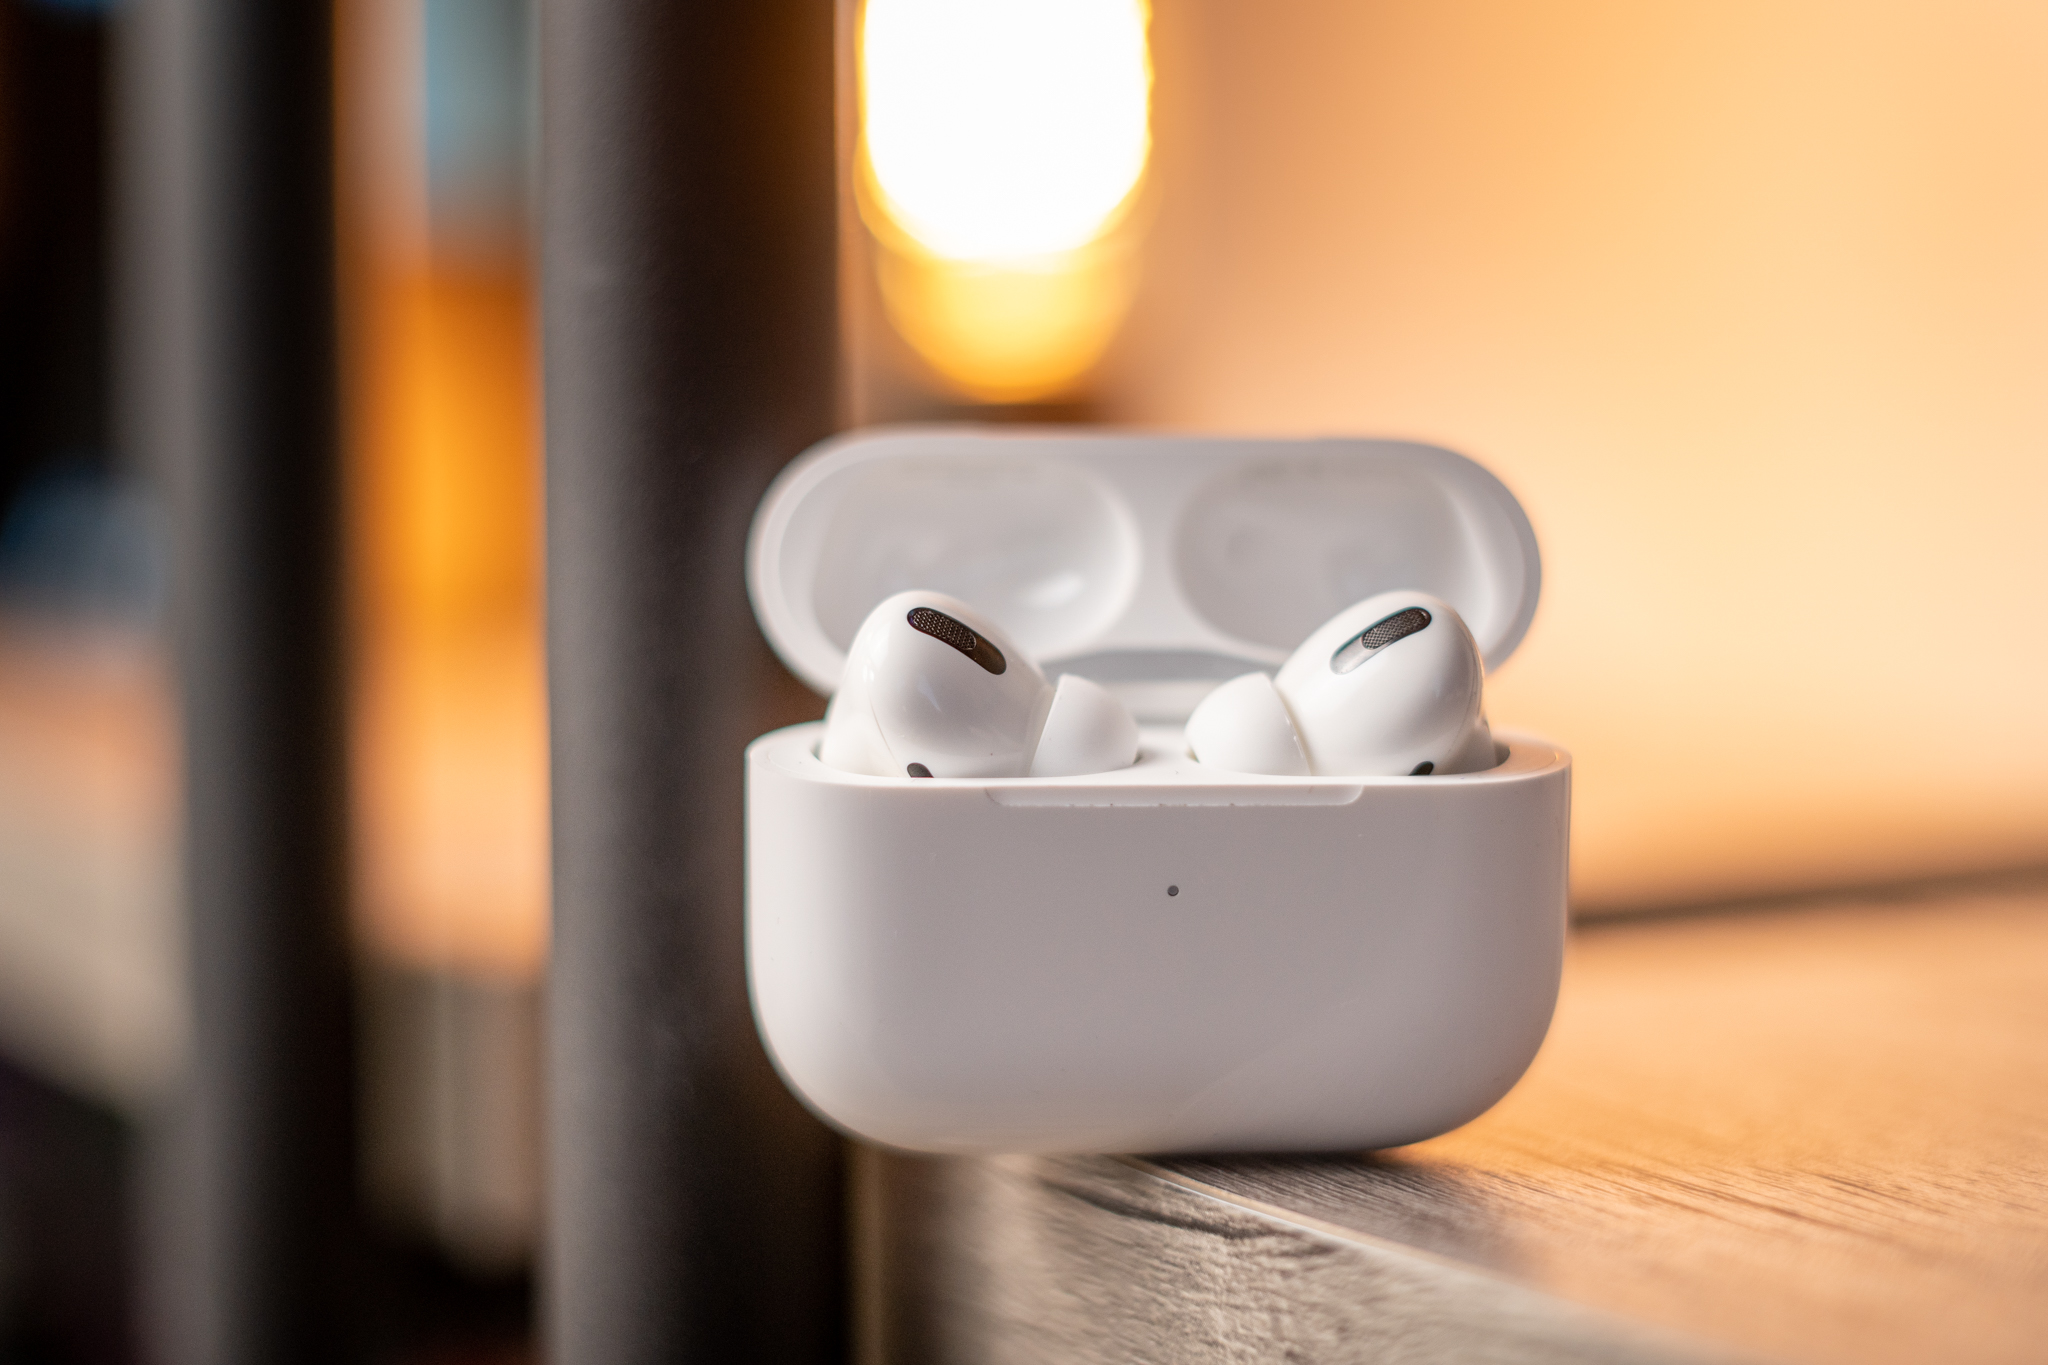 Airpods pro huilian. Apple AIRPODS Pro 2. Наушники Air pods Pro 2. Наушники TWS Apple AIRPODS Pro. AIRPODS pods 2 Pro.